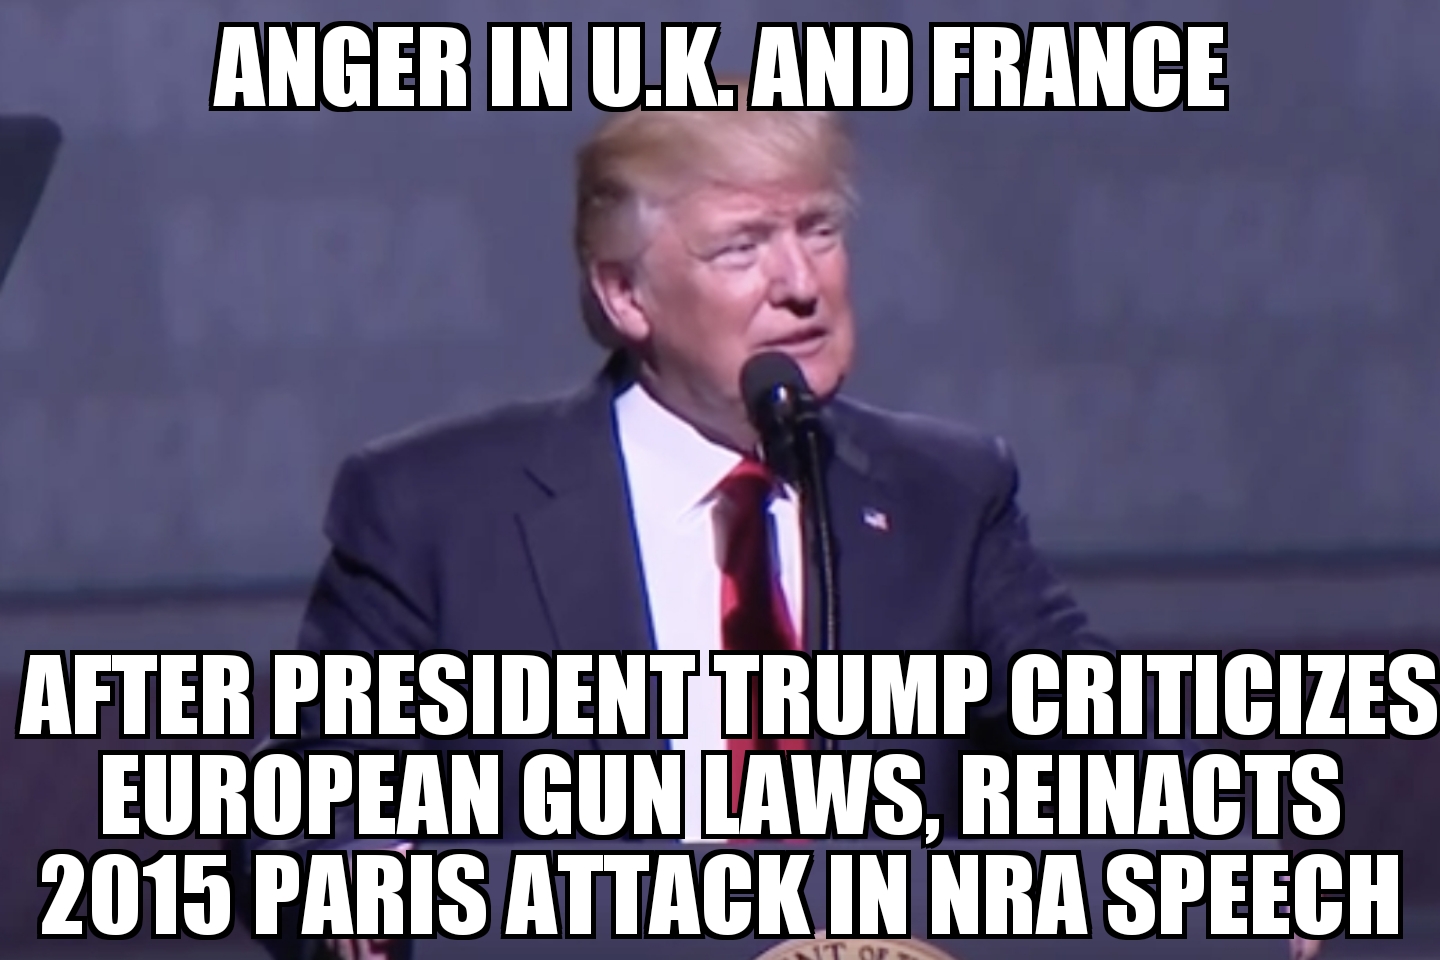 Anger in Europe over Trump NRA speech